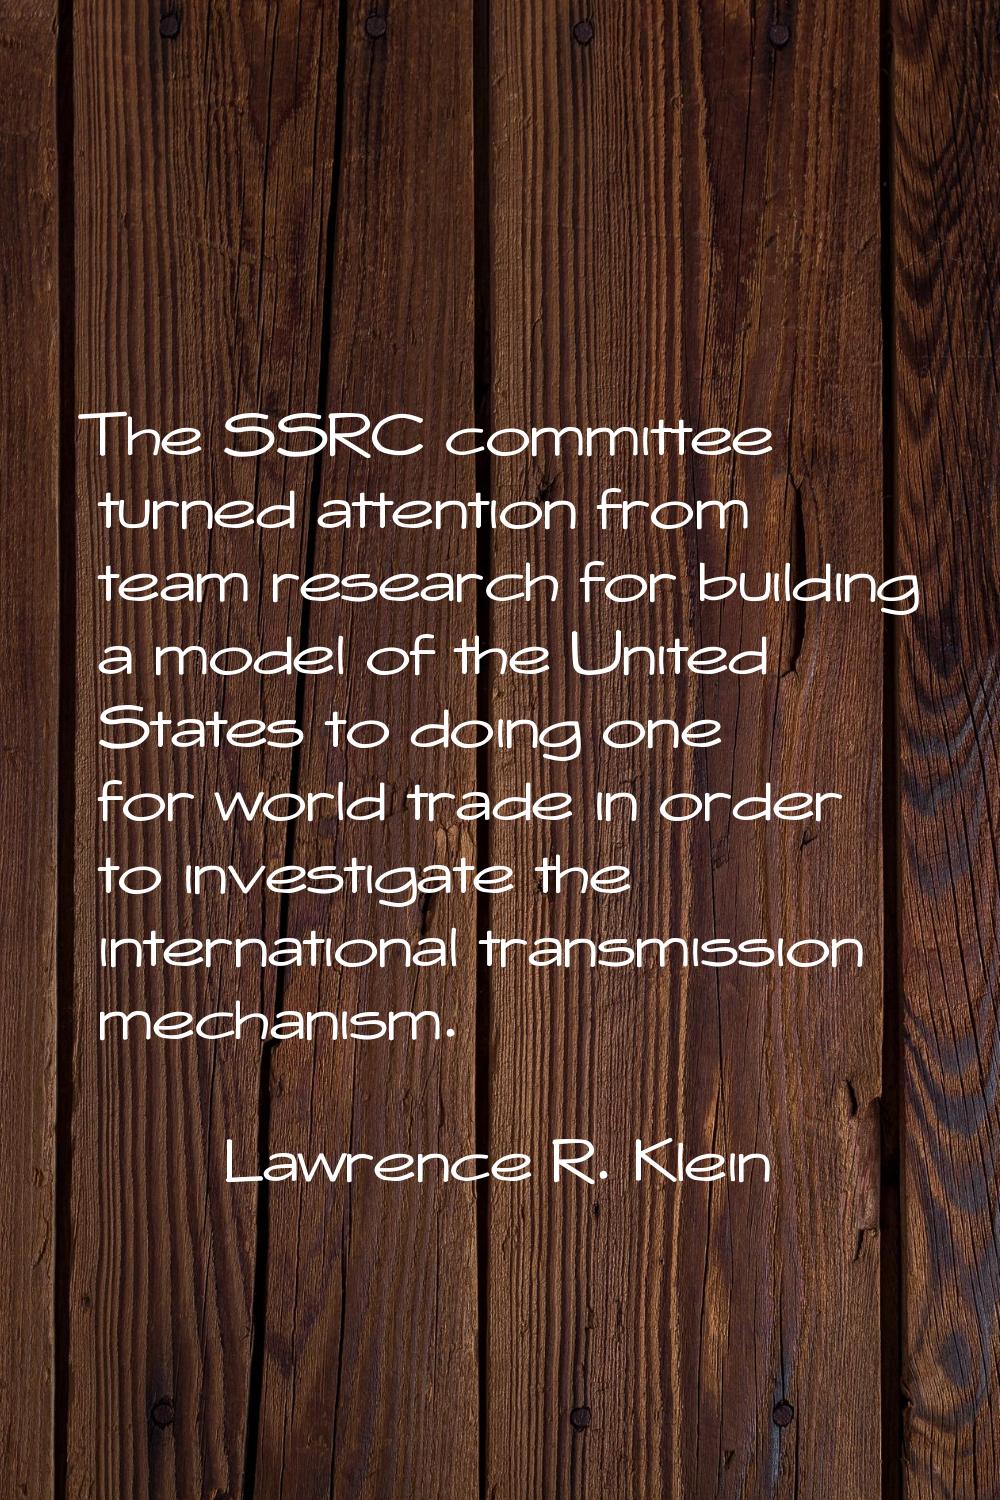 The SSRC committee turned attention from team research for building a model of the United States to